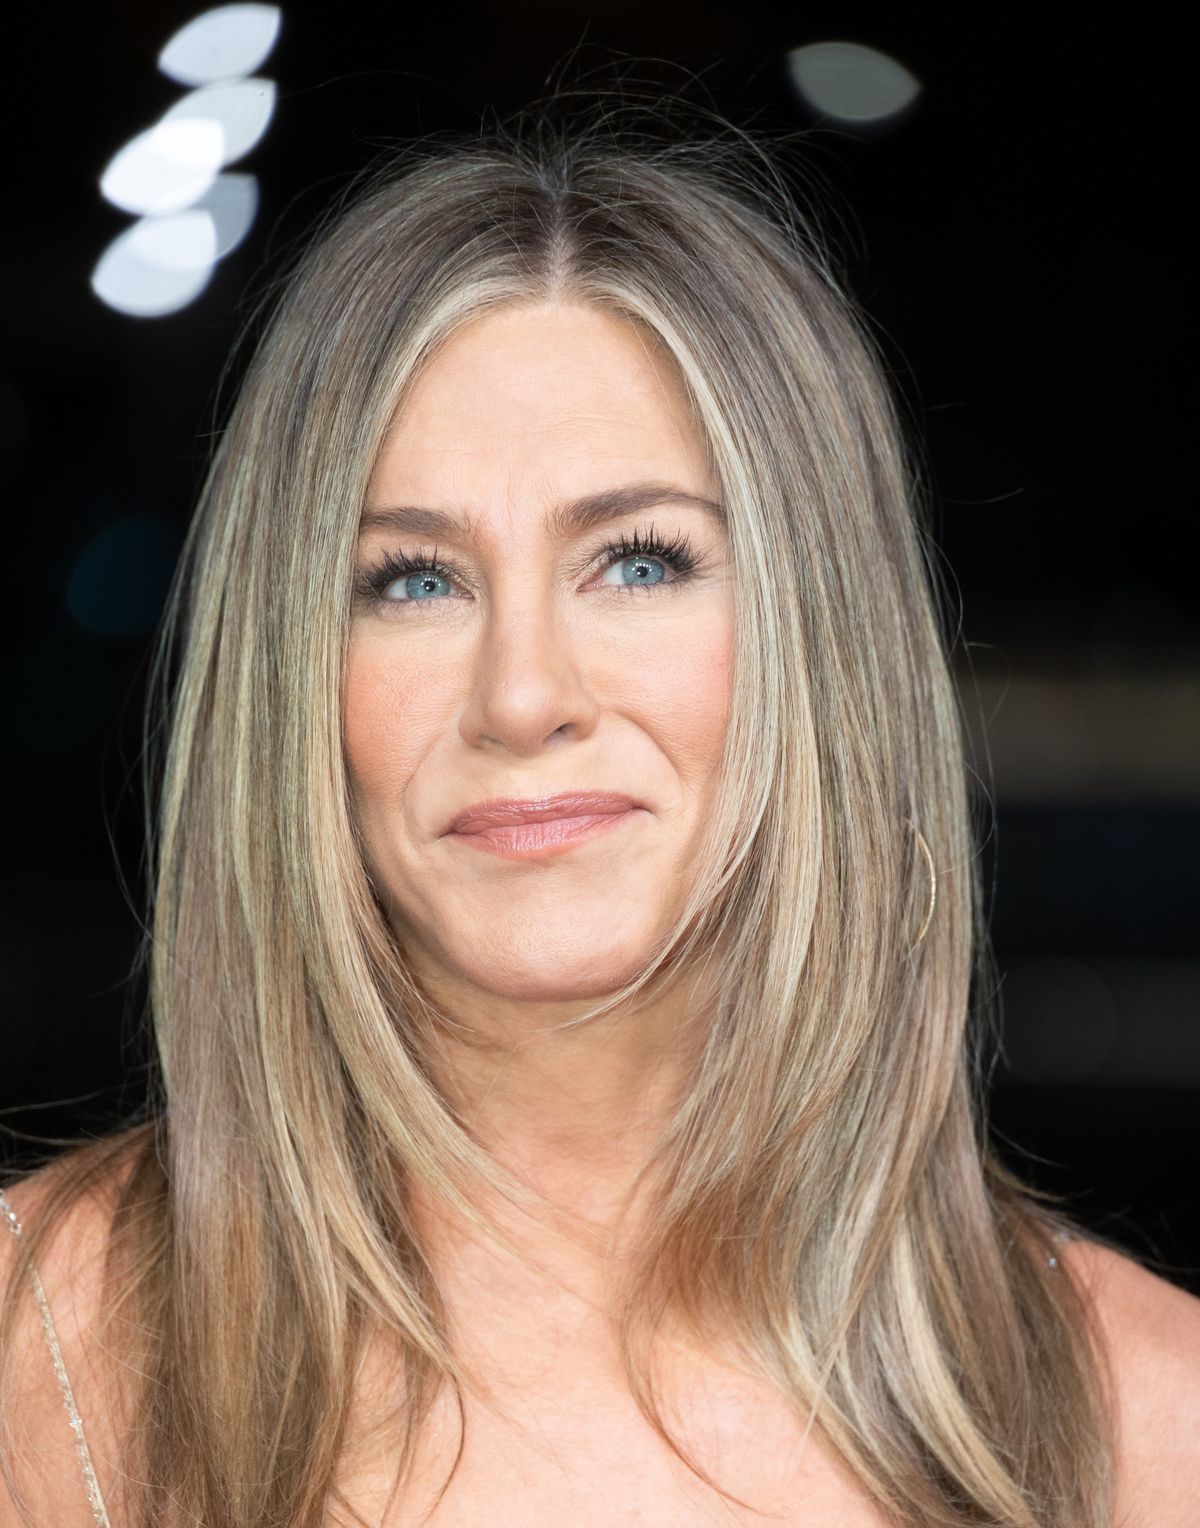 Jennifer Aniston, 54, Shares 'Exciting' Shampoo and Conditioner